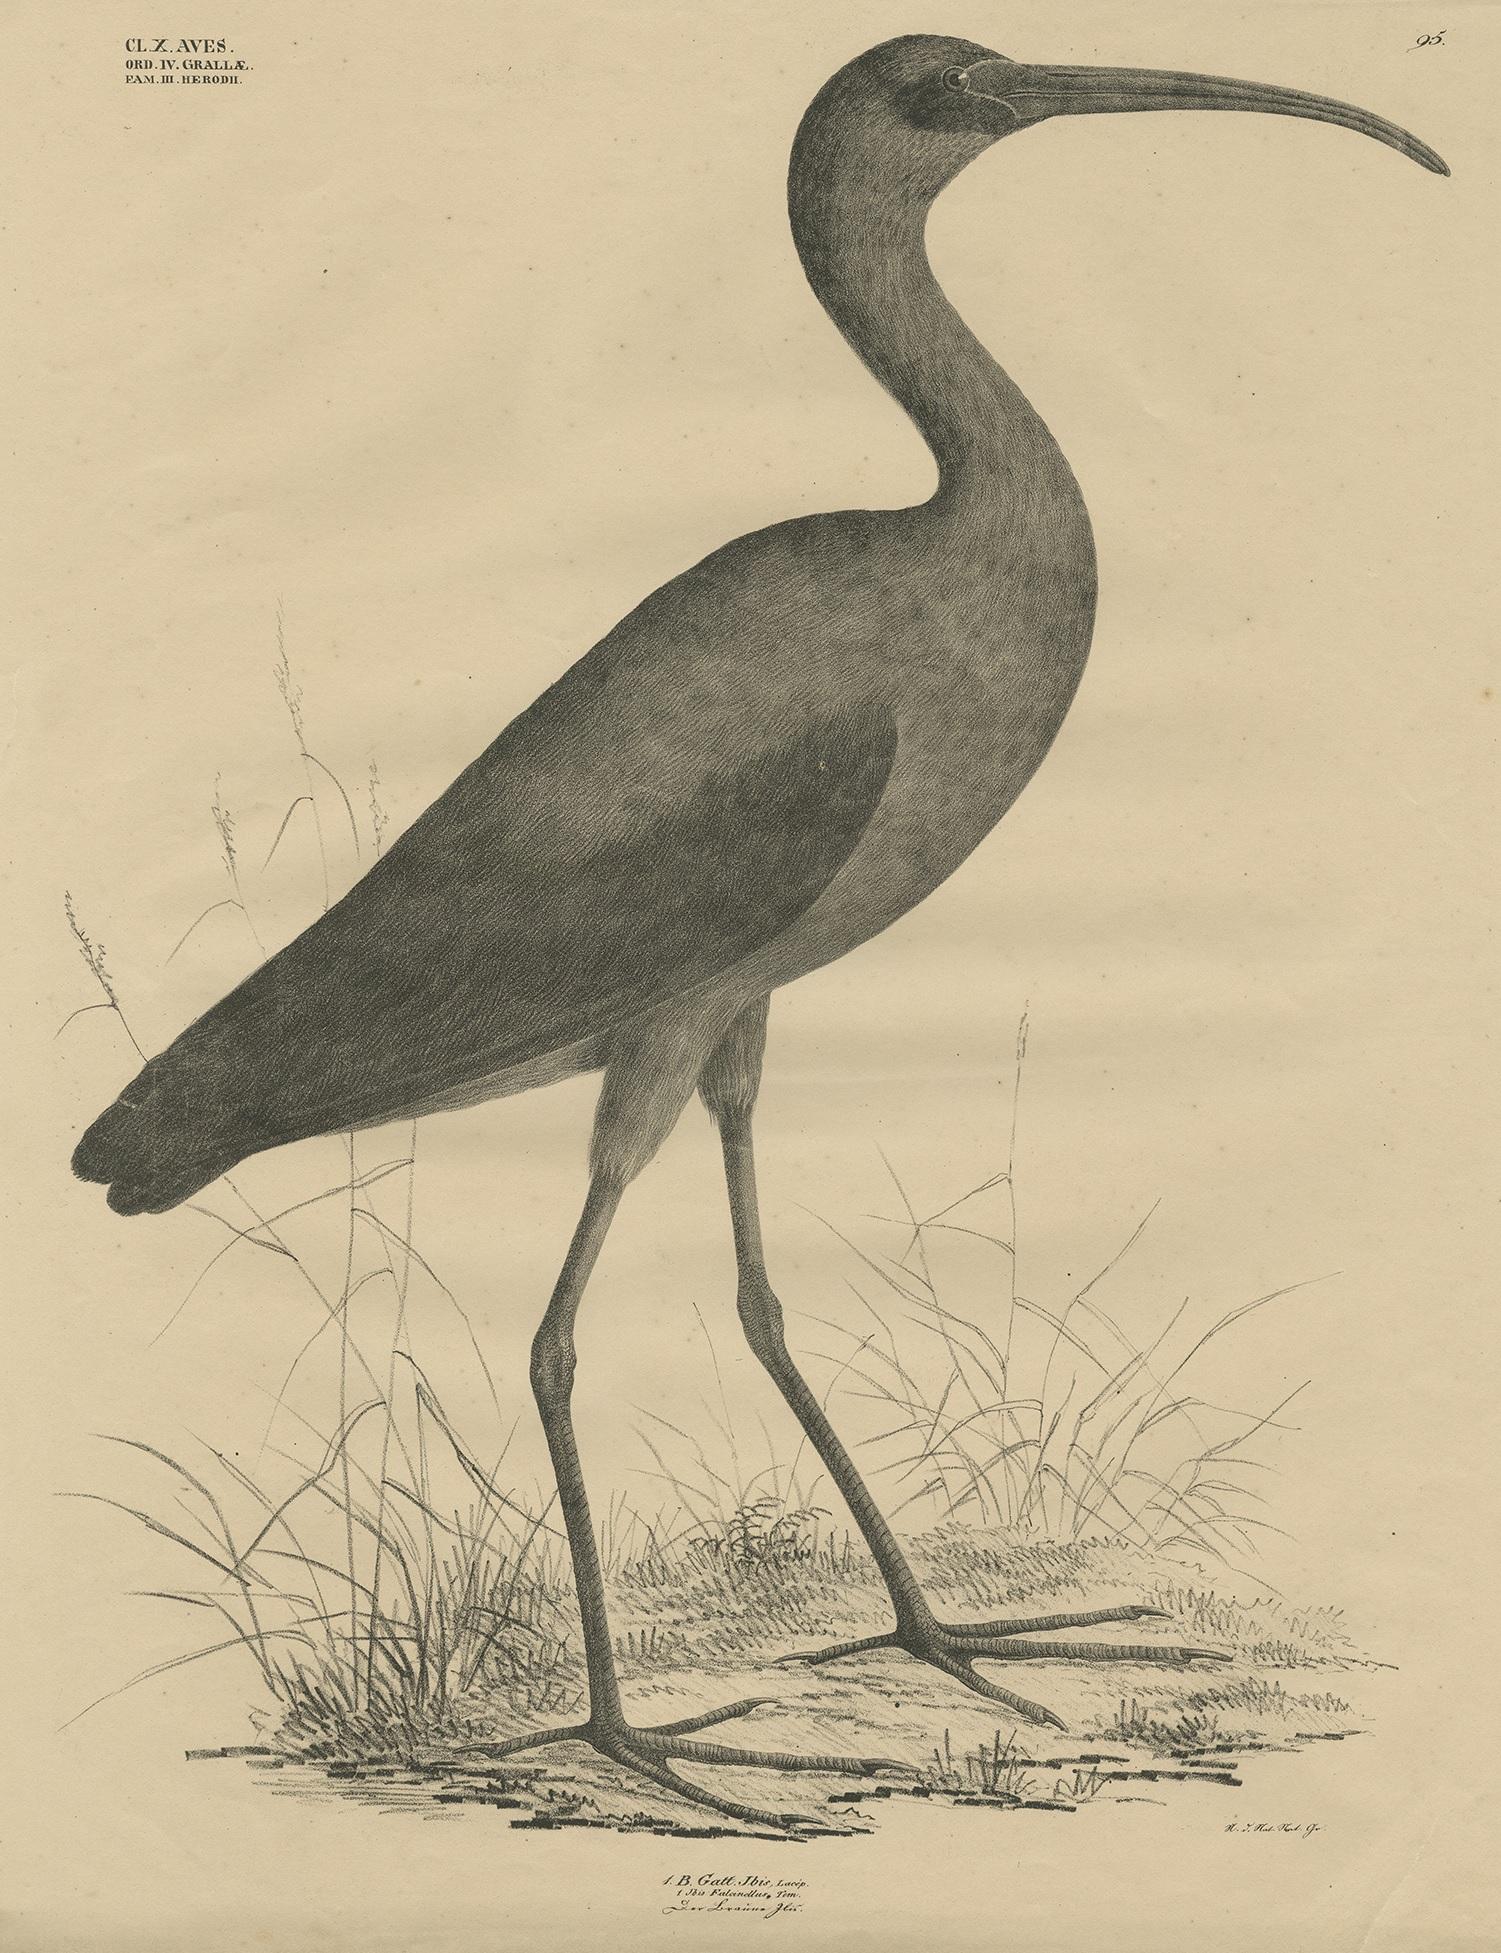 Antique bird print titled 'Gatt Ibis'. Large lithograph of the glossy ibis, a wading bird in the ibis family Threskiornithidae. The scientific name derives from Ancient Greek plegados and Latin, falcis, both meaning 